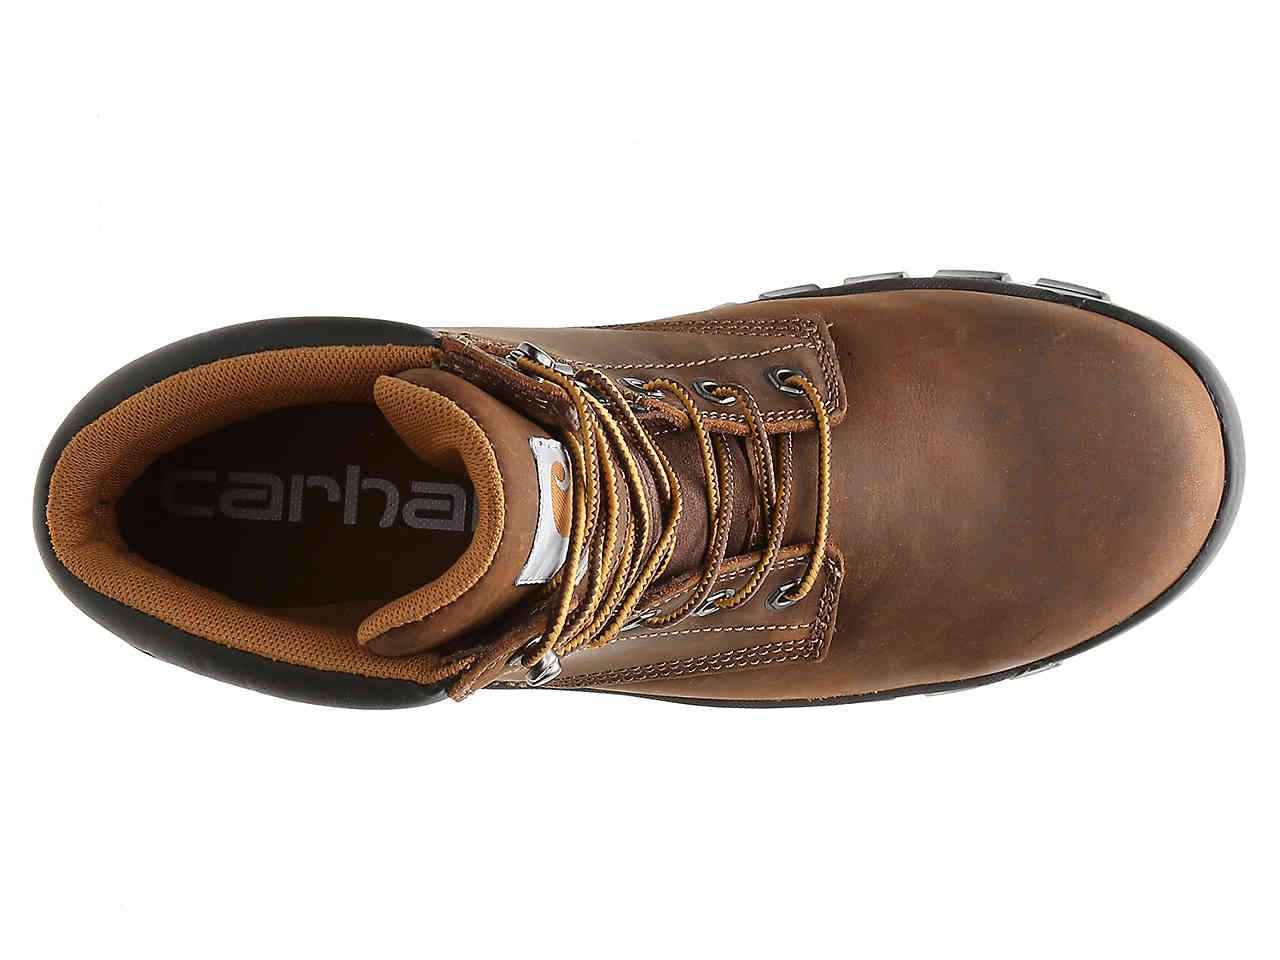 Carhartt Leather Rugged Flex 6-inch Work Boot in Dark Brown (Brown) for ...